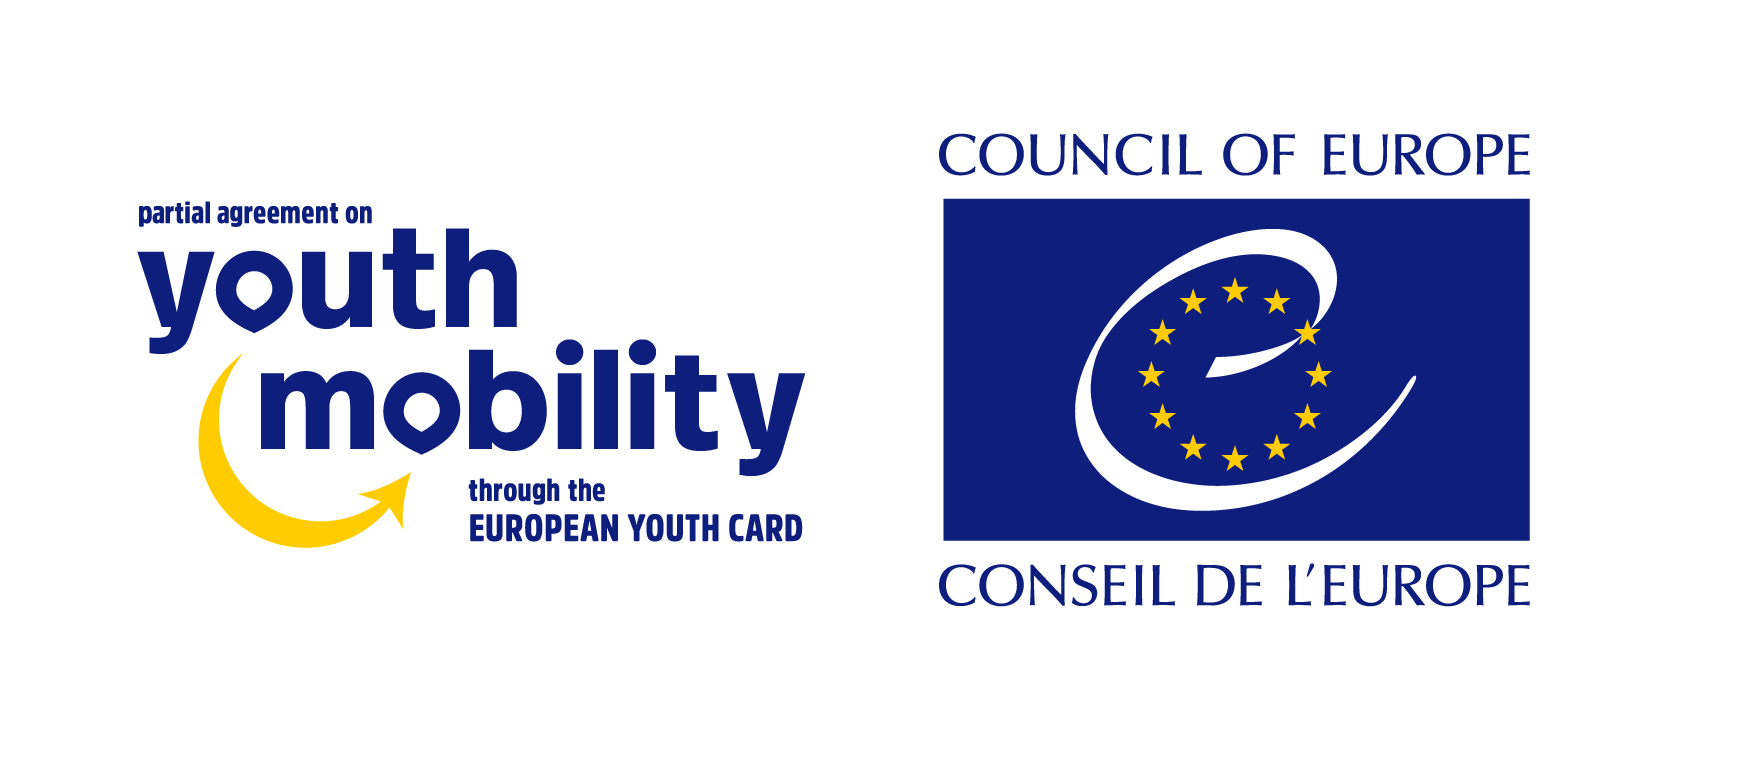 partial agreement on youth mobilty logo